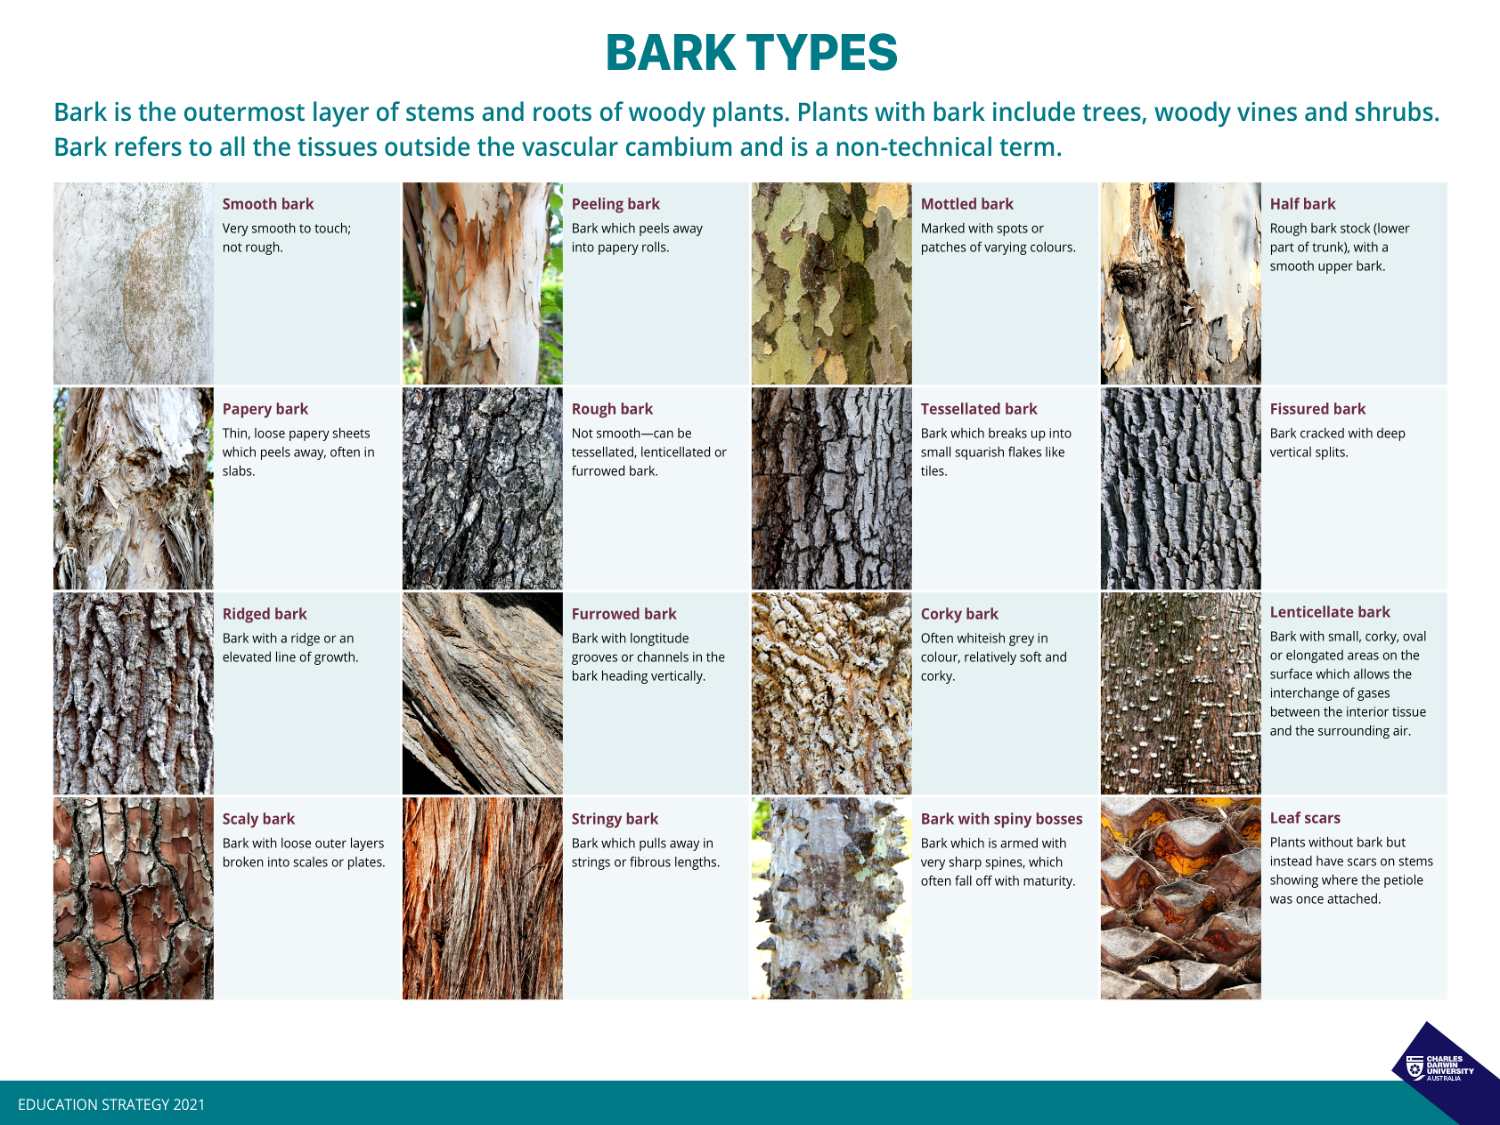 Images of all types of bark, including: smooth, peeling, mottled papery, rough, tessellated, ridged, furrowed, corky, scaly, stringy, fissured, leaf scarred